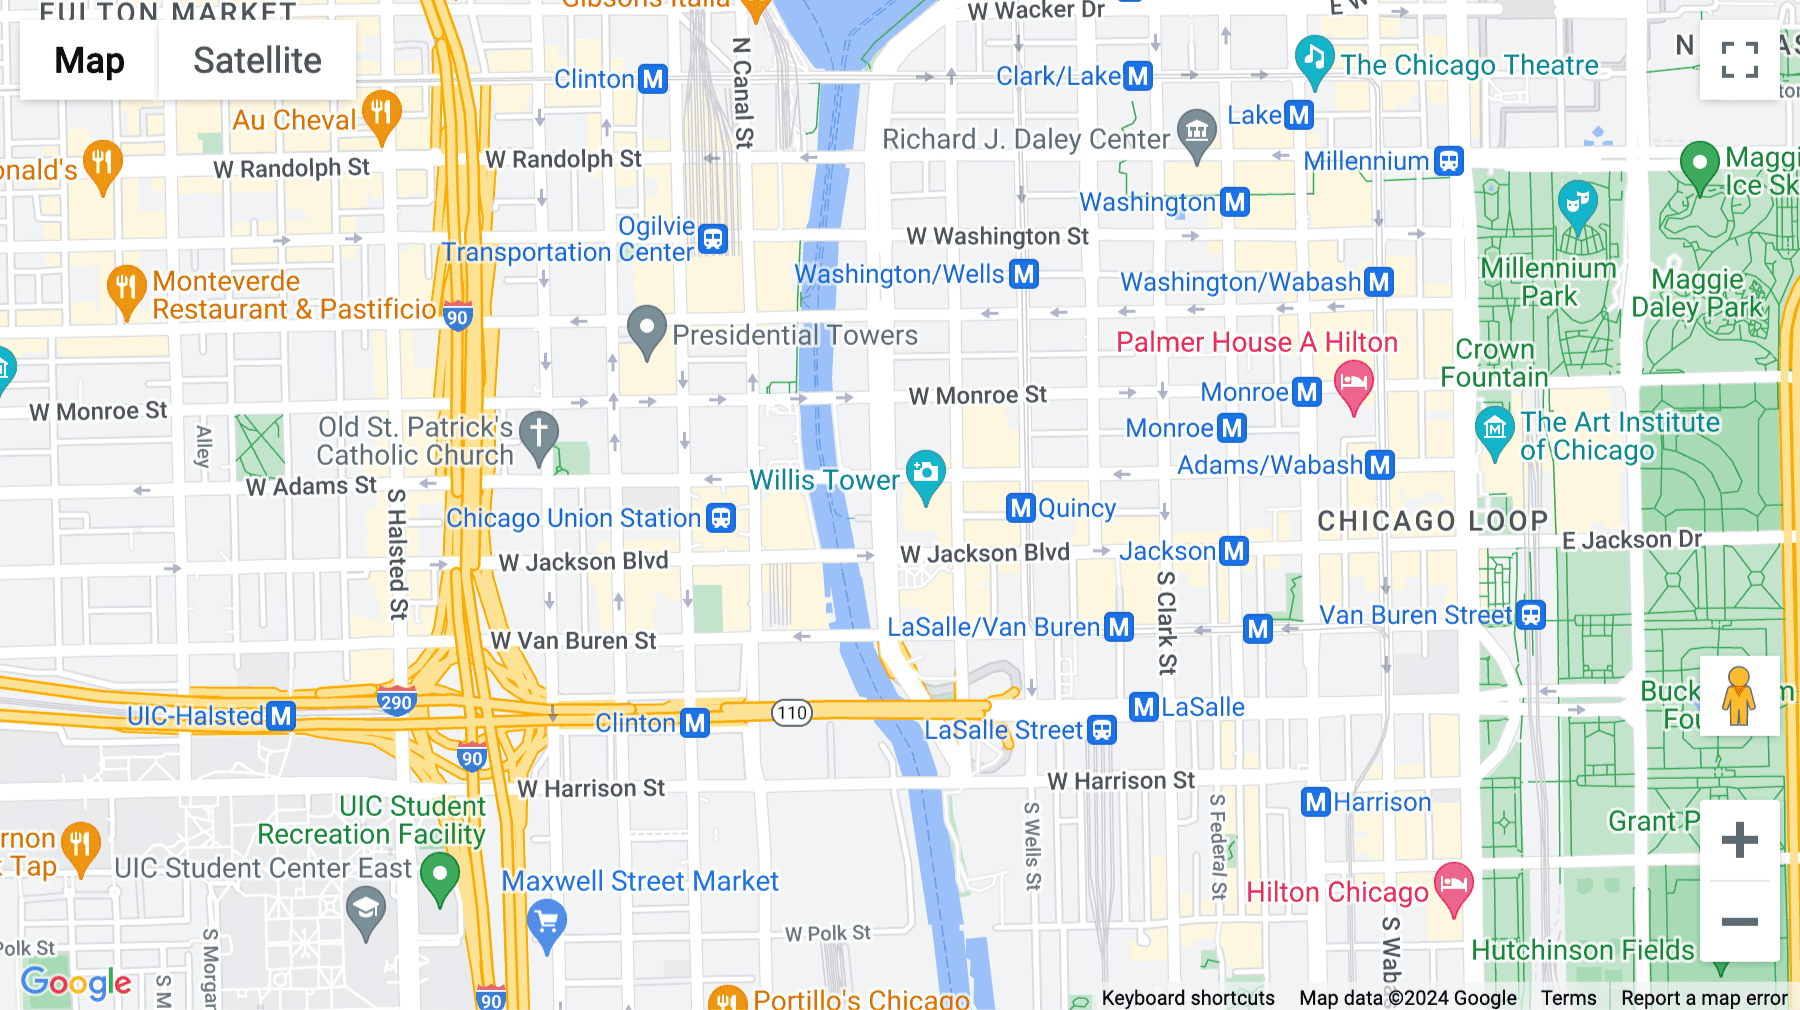 Click for interative map of 233 South Wacker Drive, Willis Tower, 44th Floor, Chicago